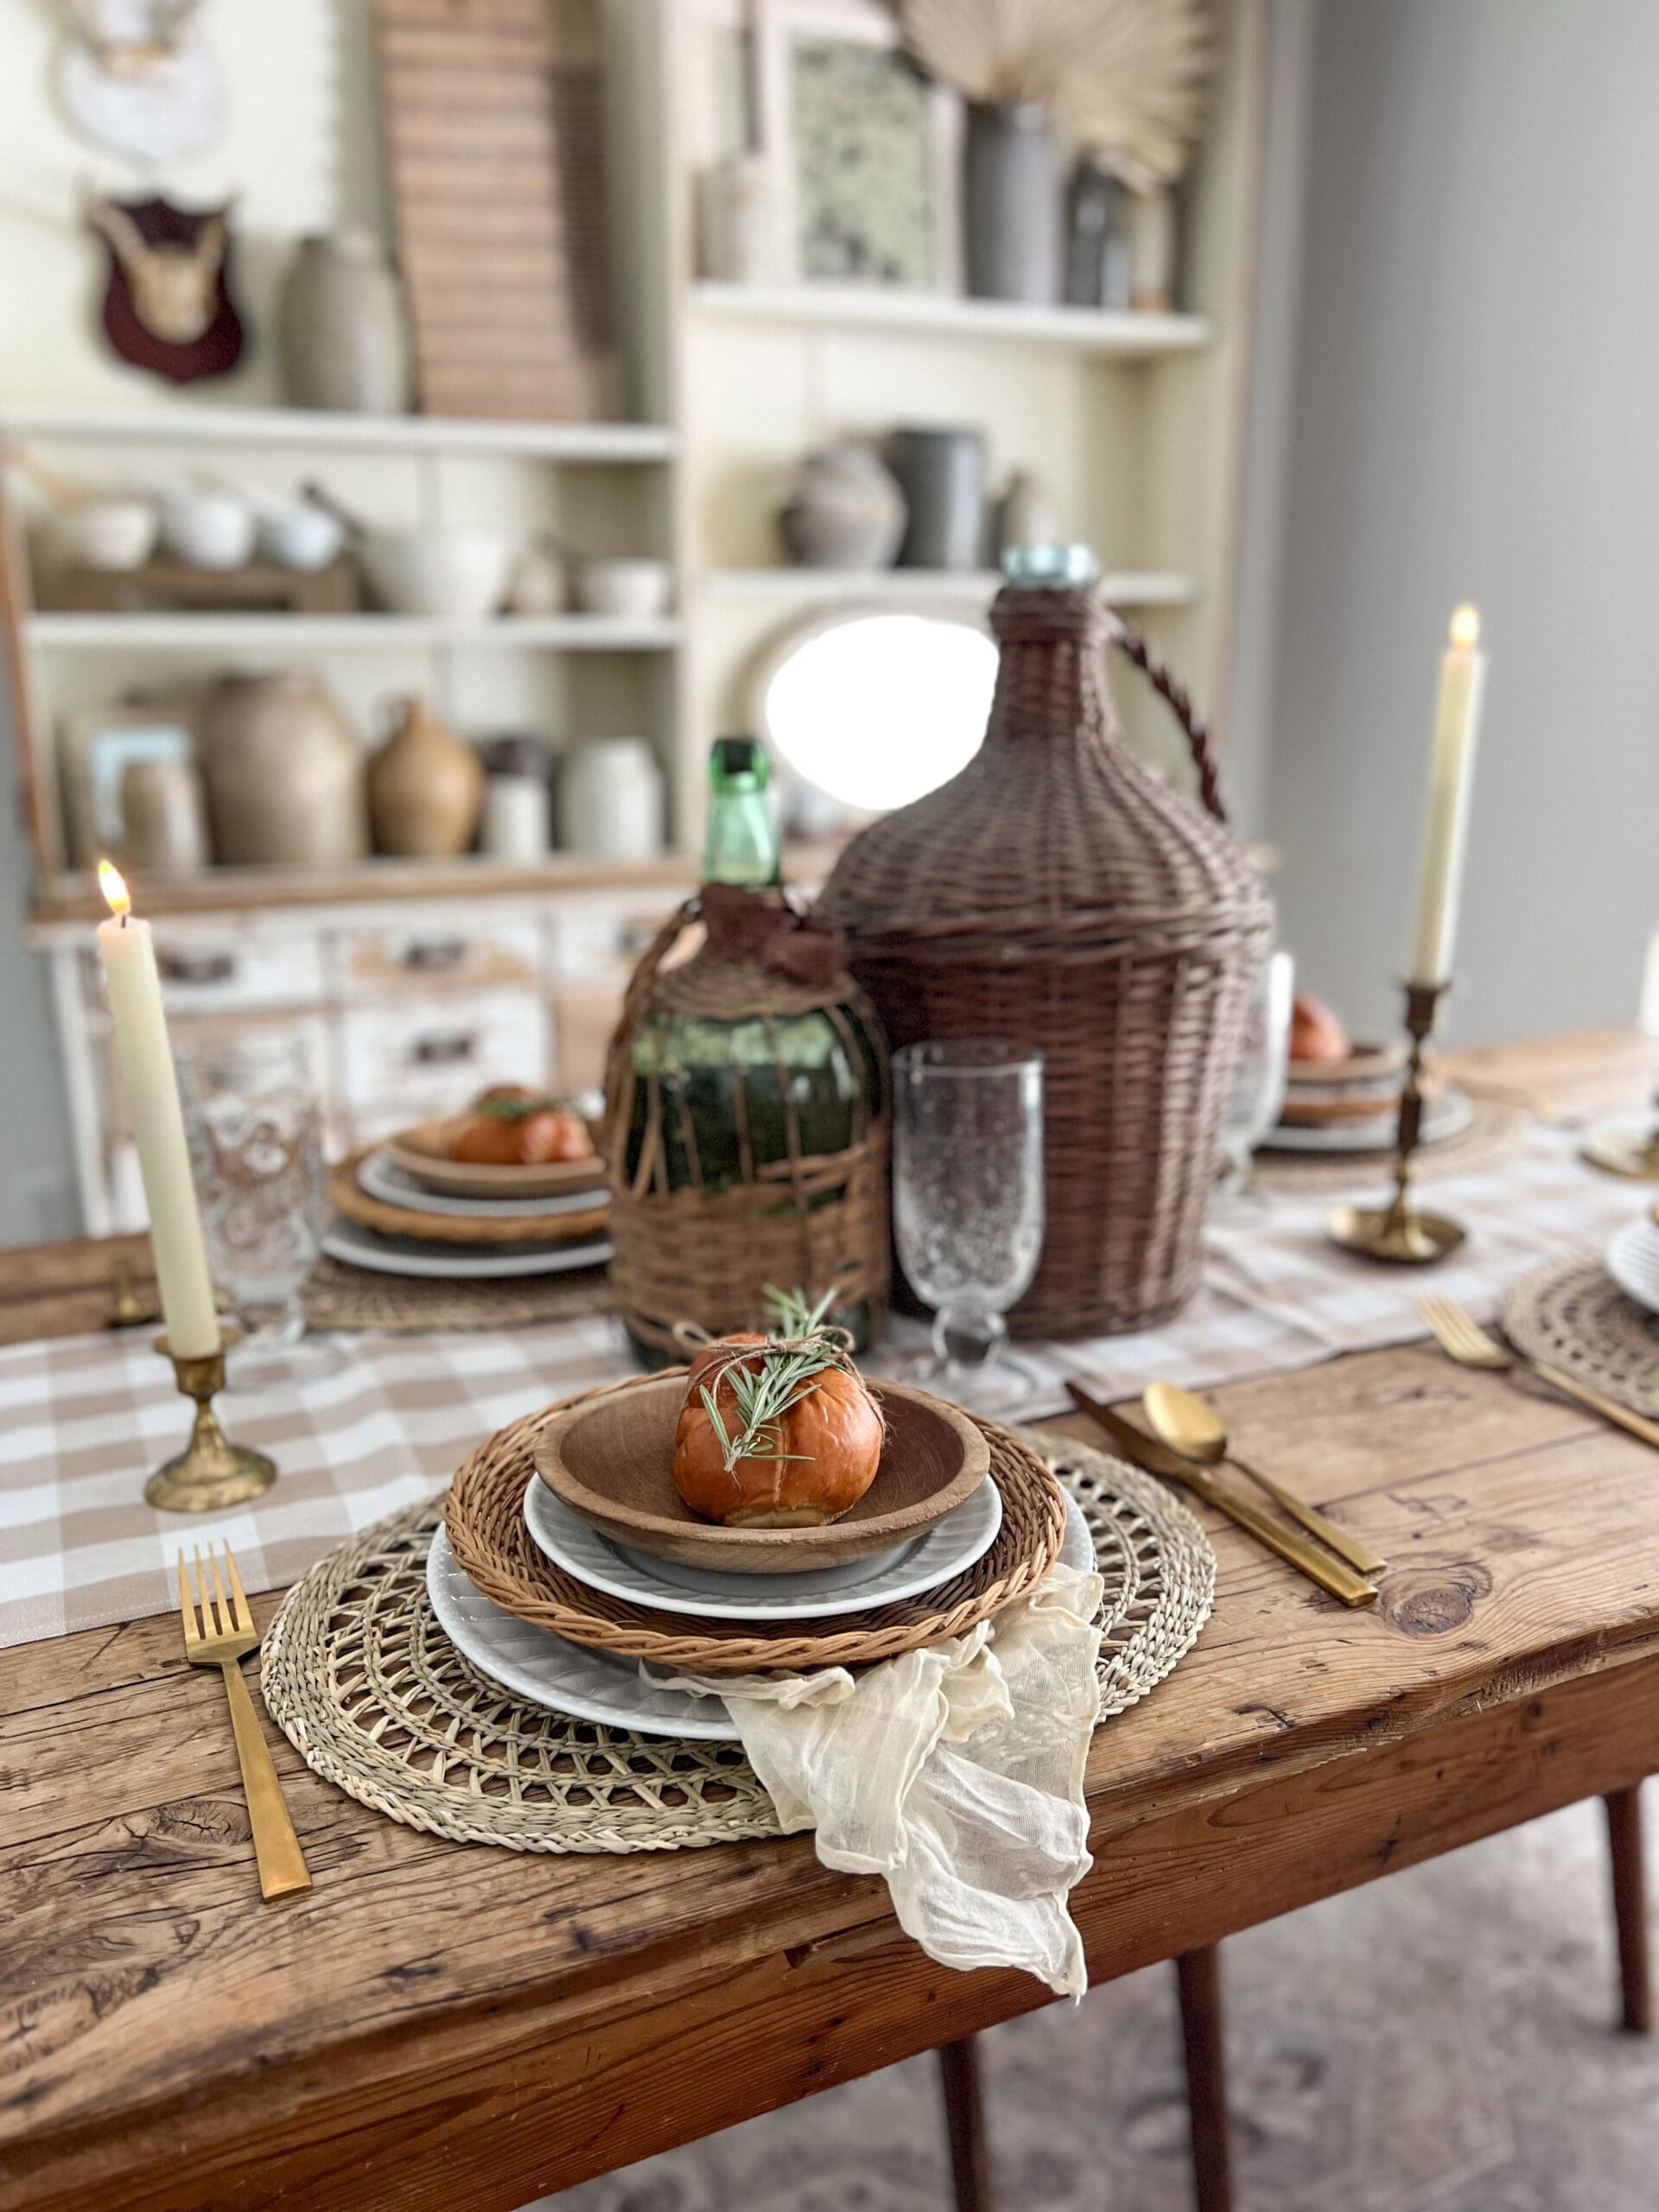 tablescape featuring checkered table runner, gold candlesticks, and lots of woven texture